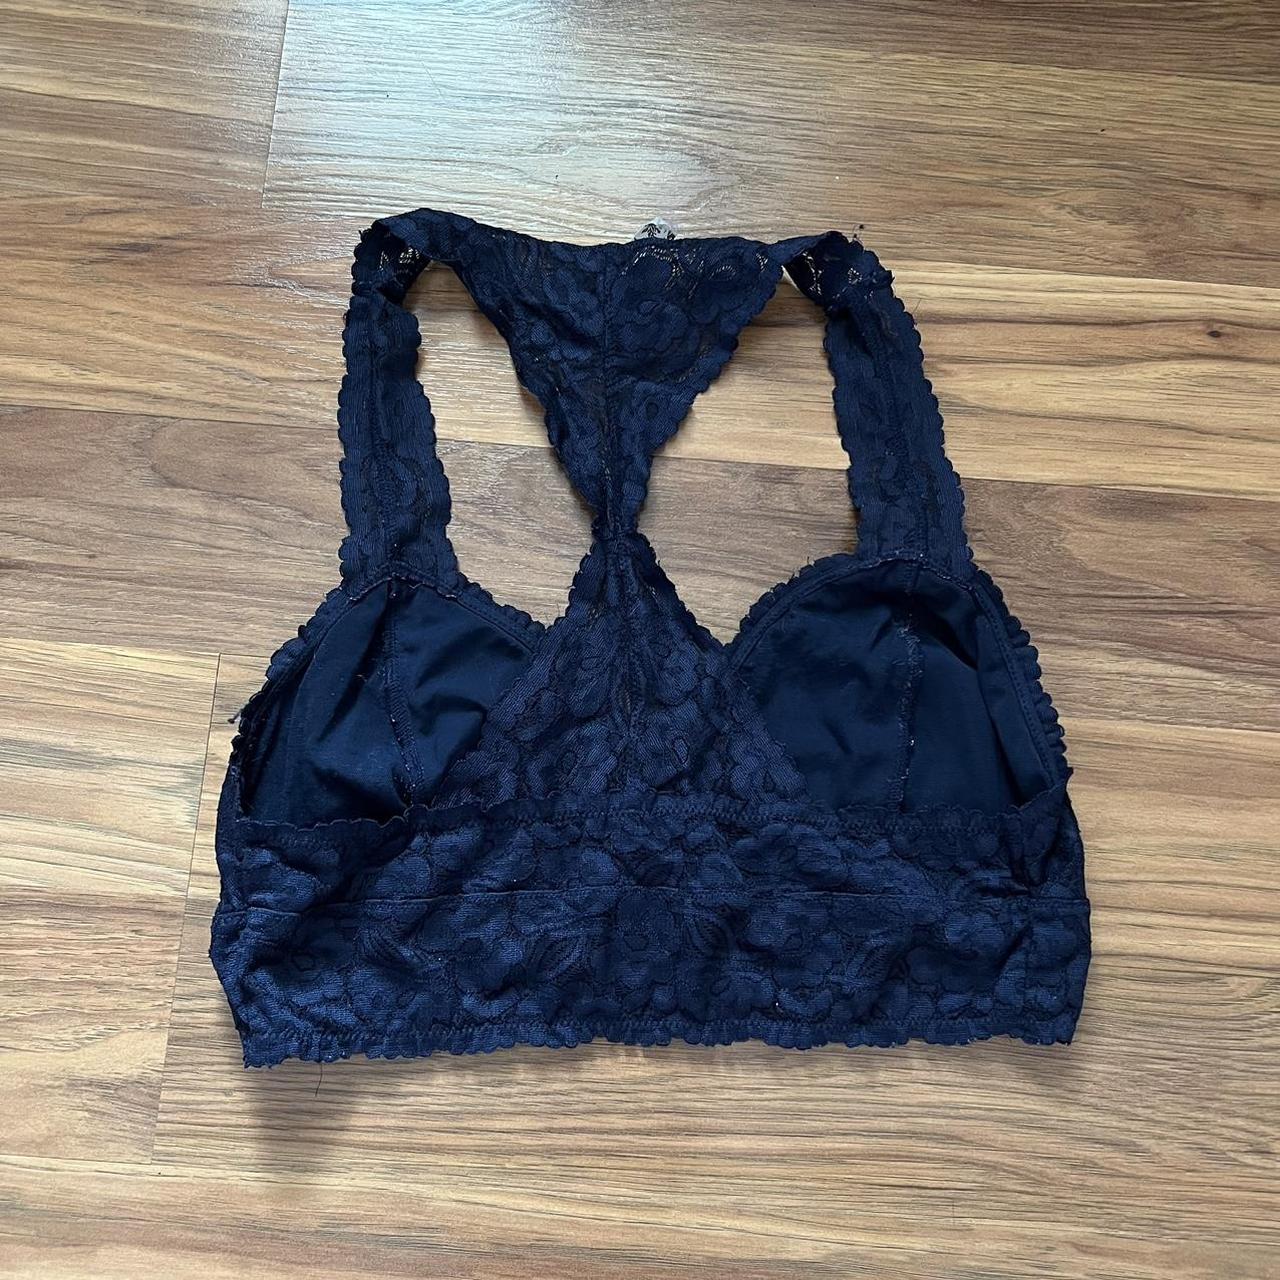 free people navy blue lace bralette, has been washed